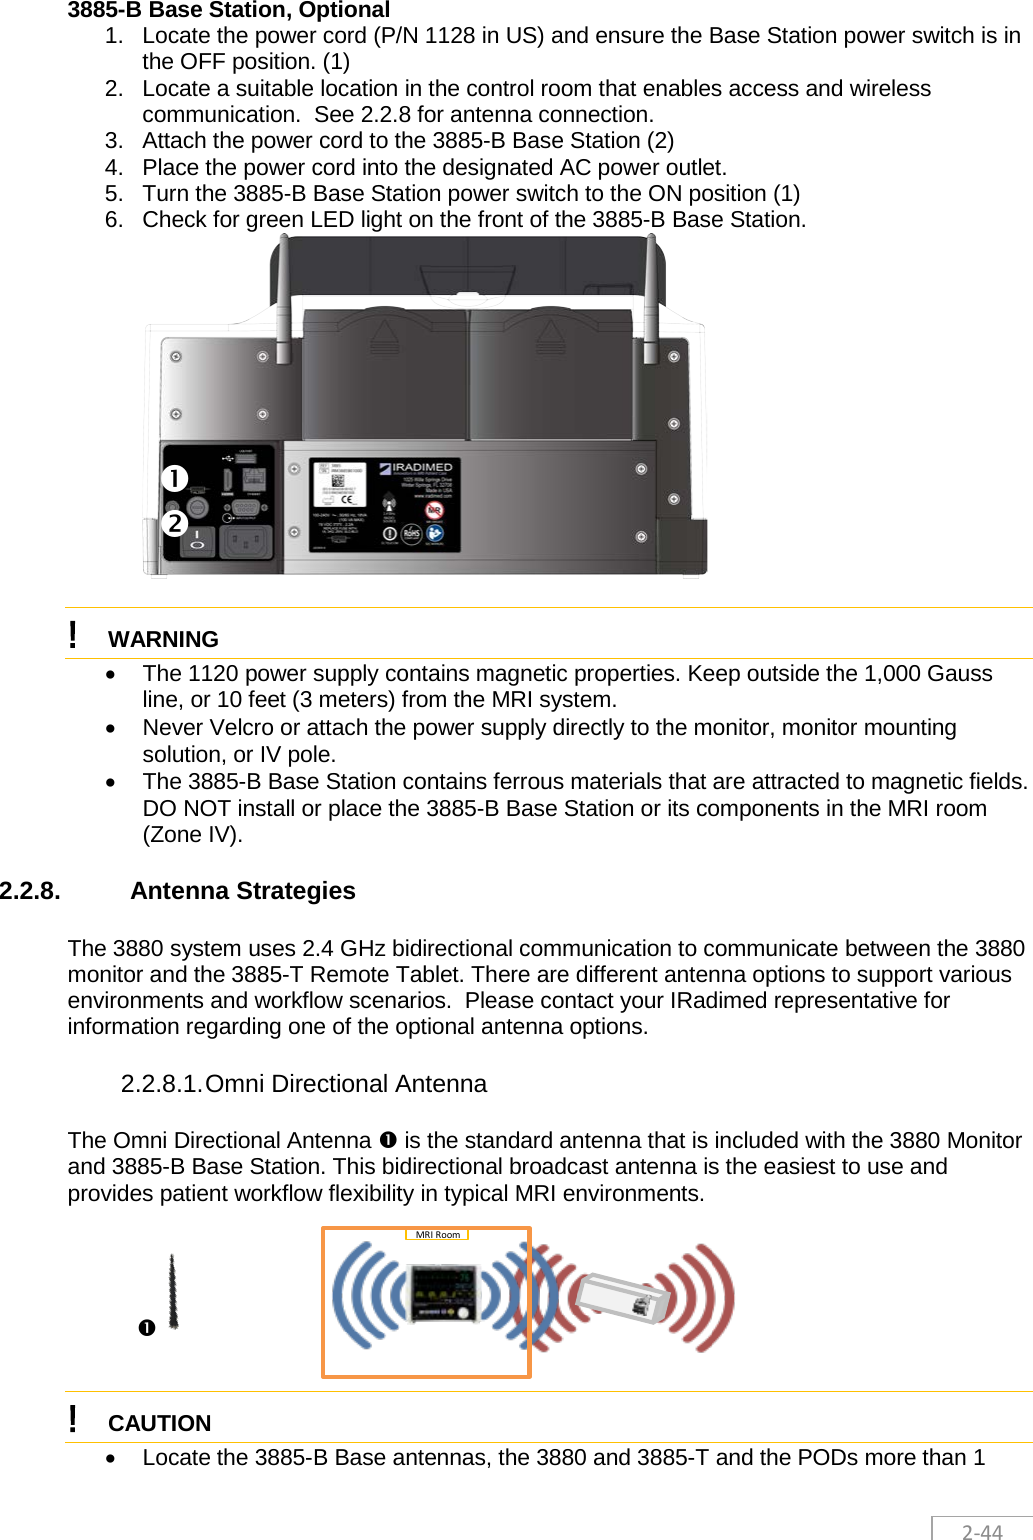  2-44 3885-B Base Station, Optional 1. Locate the power cord (P/N 1128 in US) and ensure the Base Station power switch is in the OFF position. (1) 2. Locate a suitable location in the control room that enables access and wireless communication.  See 2.2.8 for antenna connection. 3. Attach the power cord to the 3885-B Base Station (2) 4. Place the power cord into the designated AC power outlet. 5. Turn the 3885-B Base Station power switch to the ON position (1) 6. Check for green LED light on the front of the 3885-B Base Station.   ! WARNING  • The 1120 power supply contains magnetic properties. Keep outside the 1,000 Gauss line, or 10 feet (3 meters) from the MRI system. • Never Velcro or attach the power supply directly to the monitor, monitor mounting solution, or IV pole.  • The 3885-B Base Station contains ferrous materials that are attracted to magnetic fields. DO NOT install or place the 3885-B Base Station or its components in the MRI room (Zone IV).  2.2.8. Antenna Strategies The 3880 system uses 2.4 GHz bidirectional communication to communicate between the 3880 monitor and the 3885-T Remote Tablet. There are different antenna options to support various environments and workflow scenarios.  Please contact your IRadimed representative for information regarding one of the optional antenna options. 2.2.8.1. Omni Directional Antenna The Omni Directional Antenna  is the standard antenna that is included with the 3880 Monitor and 3885-B Base Station. This bidirectional broadcast antenna is the easiest to use and provides patient workflow flexibility in typical MRI environments.         ! CAUTION  • Locate the 3885-B Base antennas, the 3880 and 3885-T and the PODs more than 1       MRI Room 